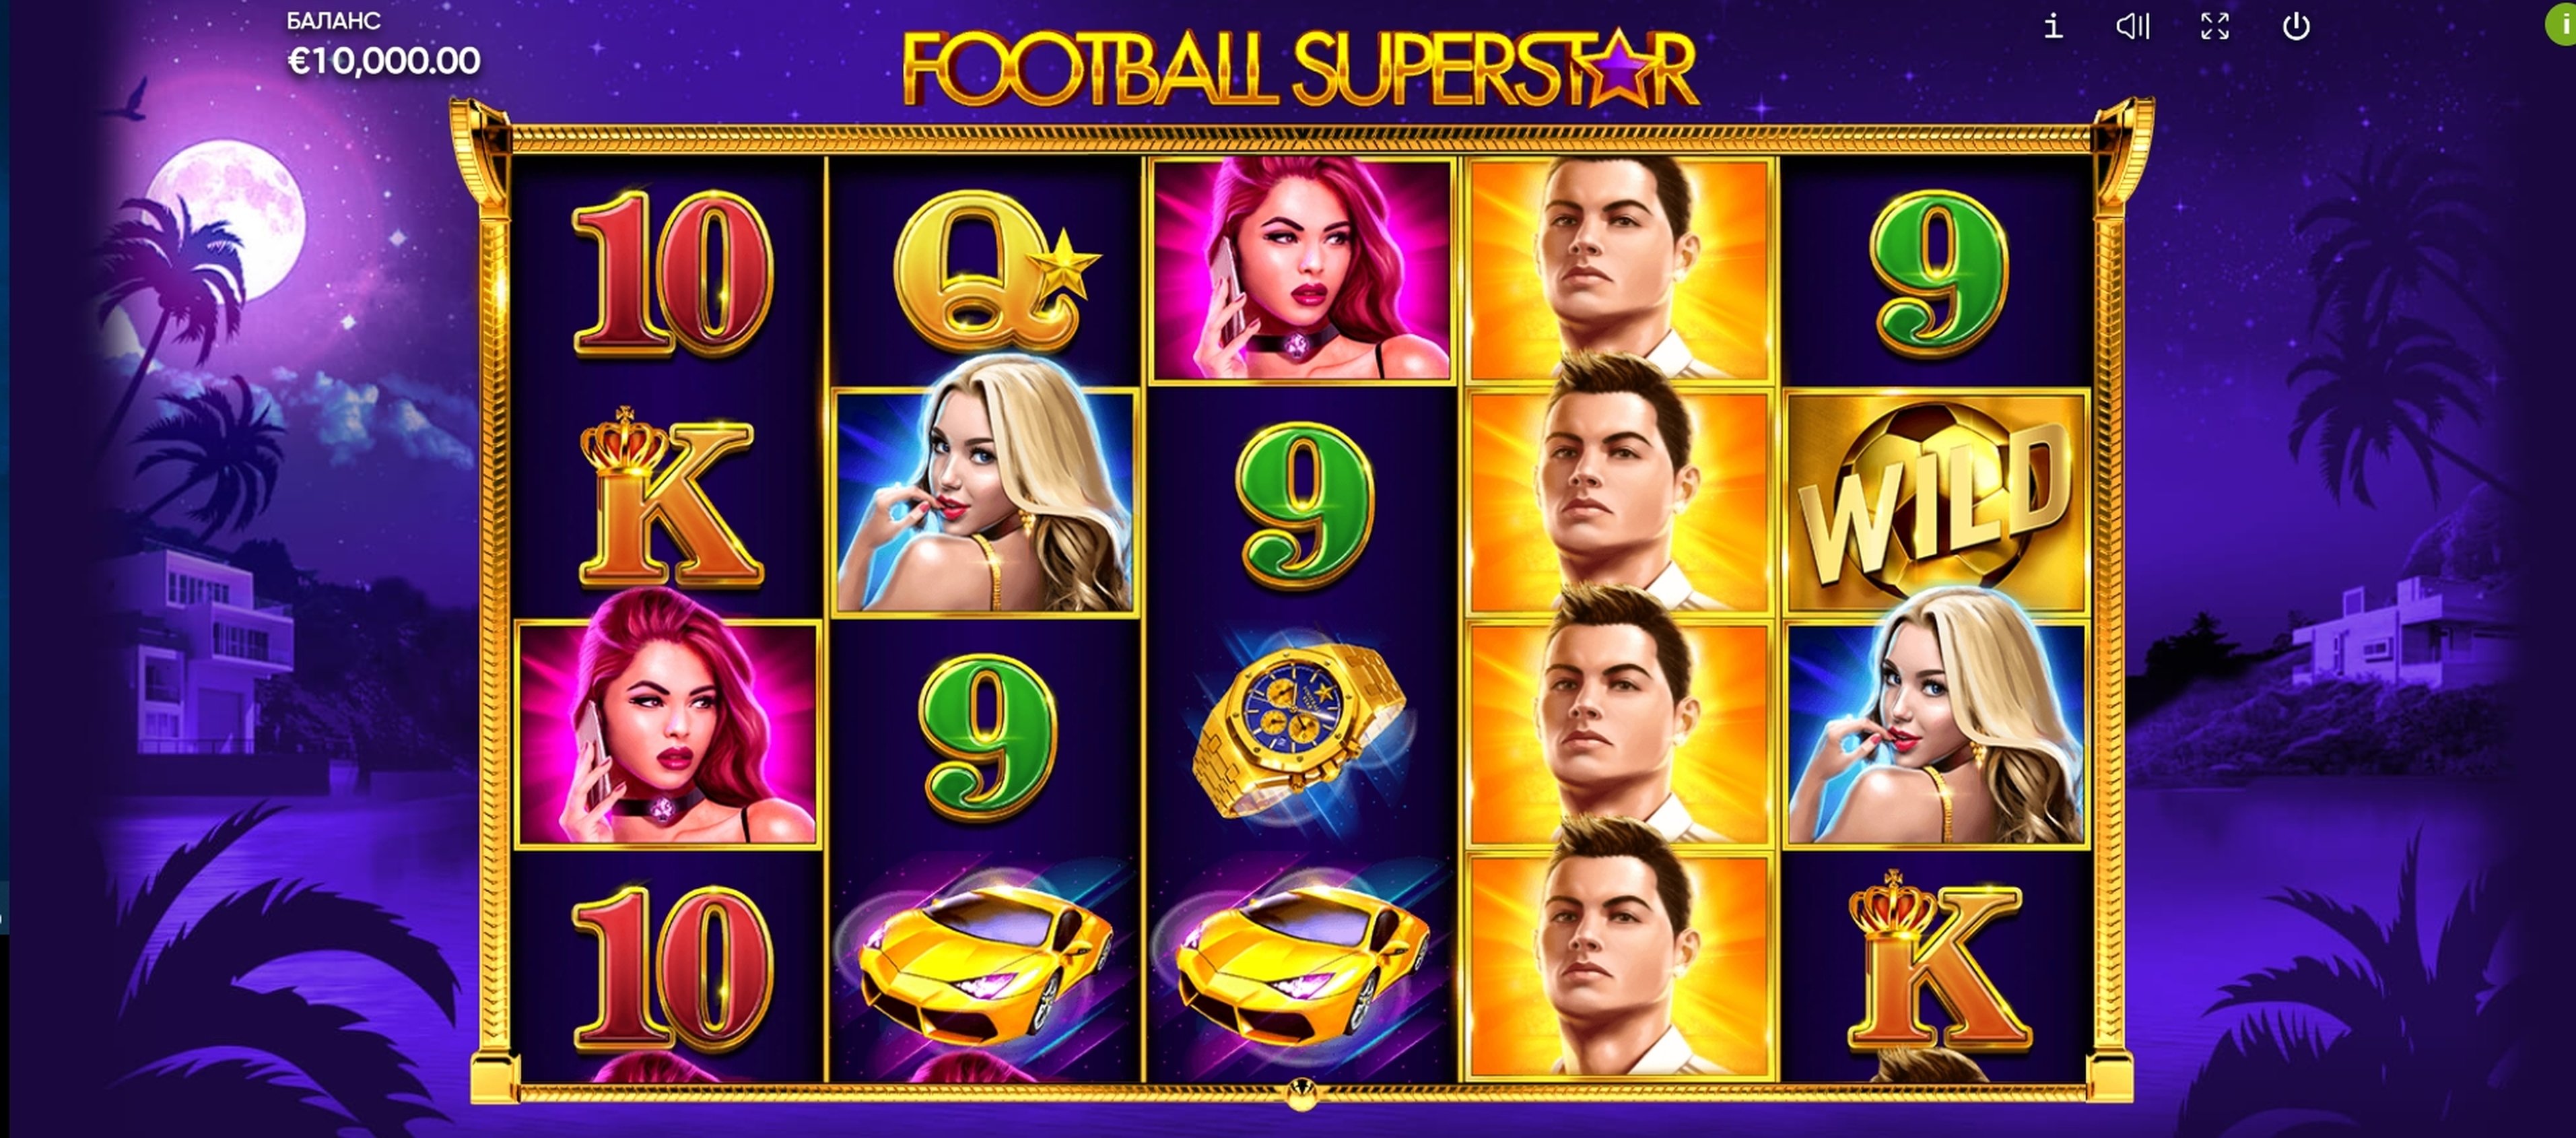 Reels in Football Superstar Slot Game by Endorphina